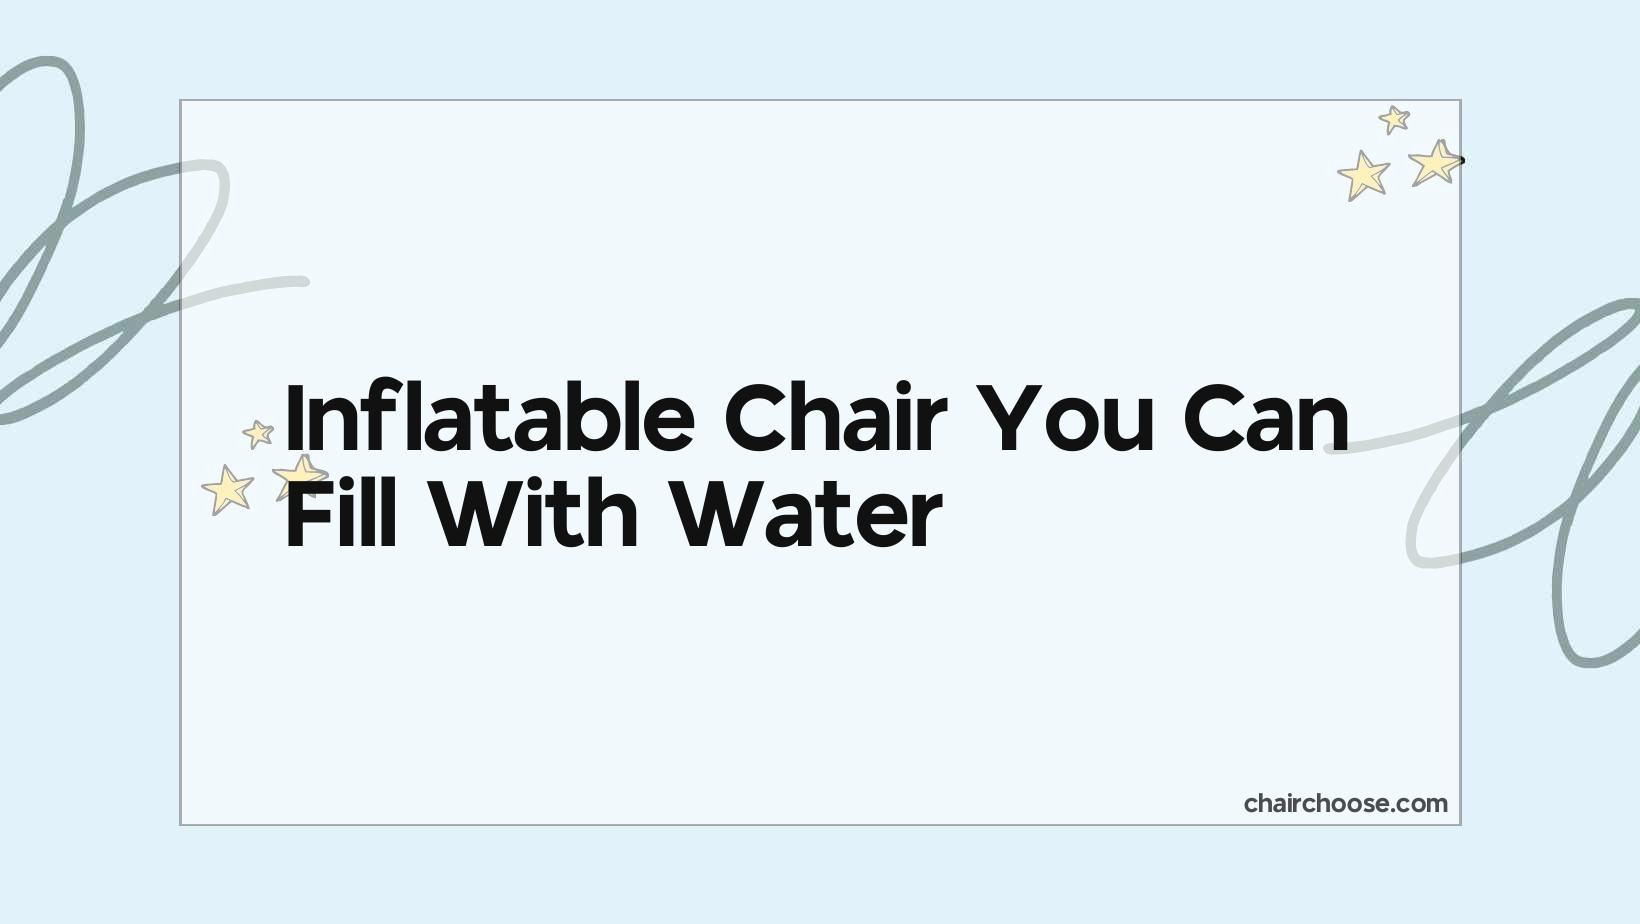 Can You Fill An Inflatable Chair With Water?